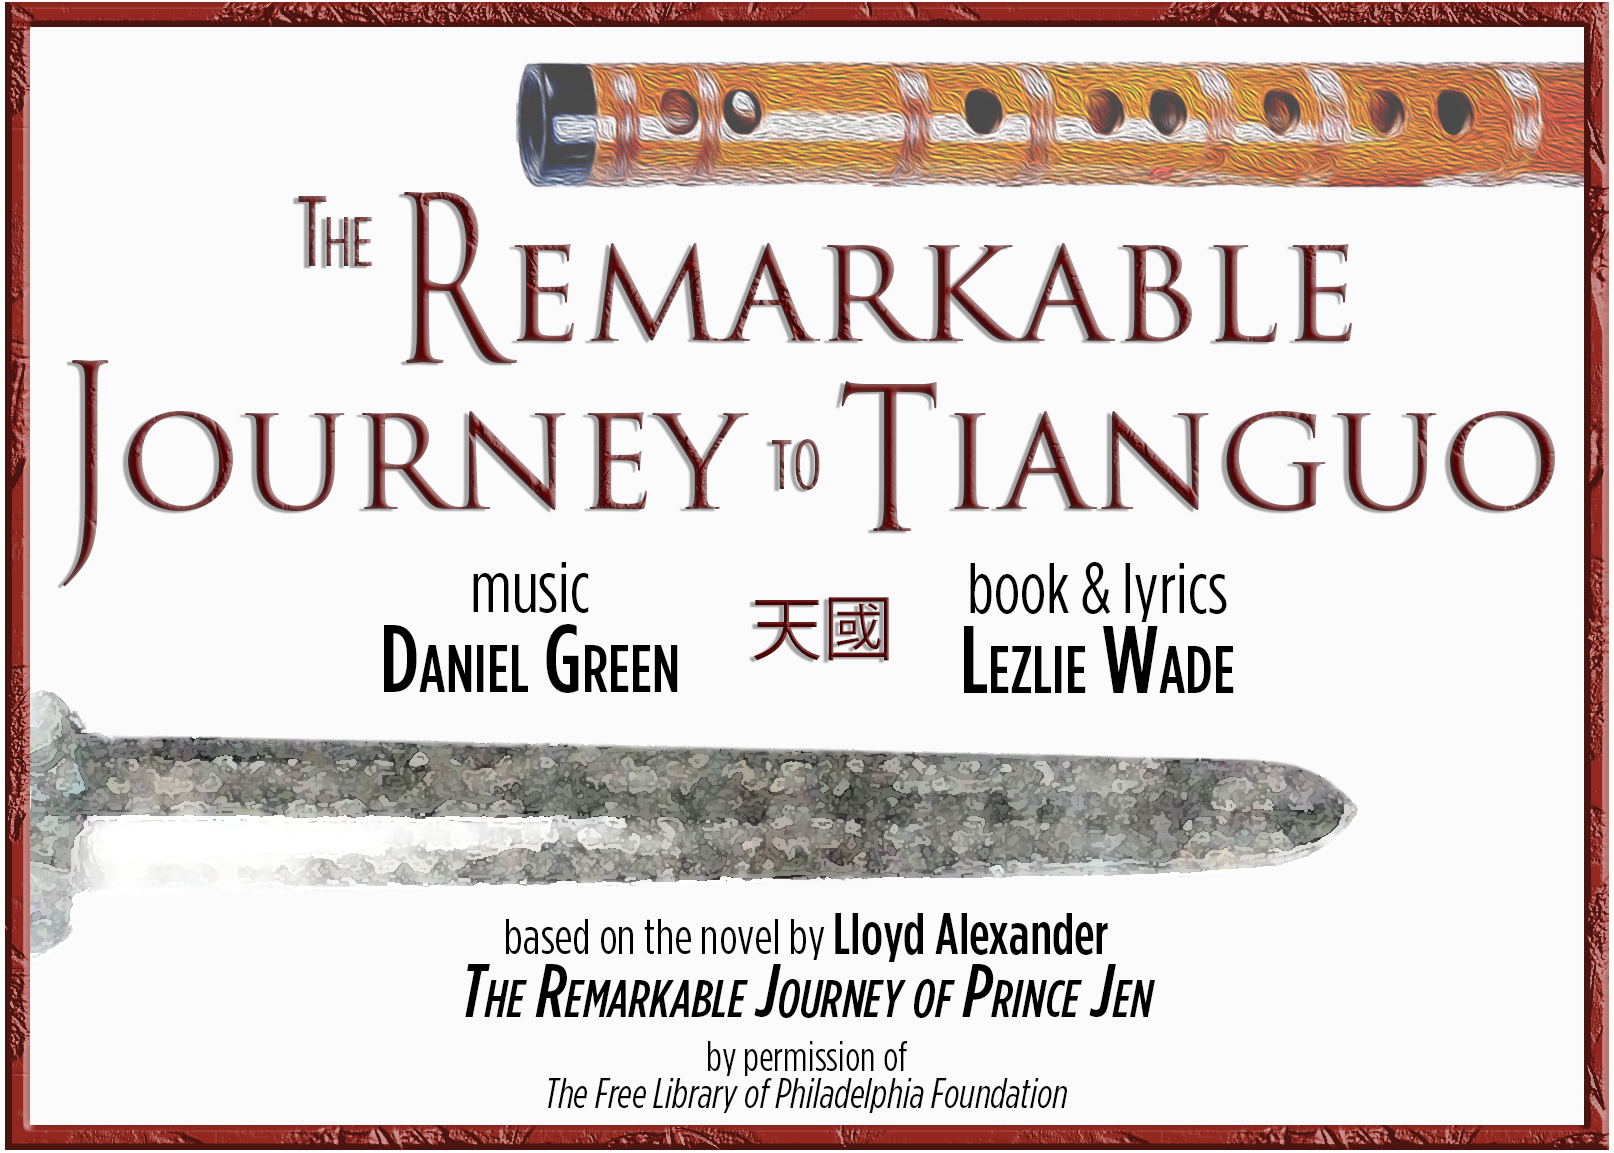 The Remarkable Journey to Tianguo